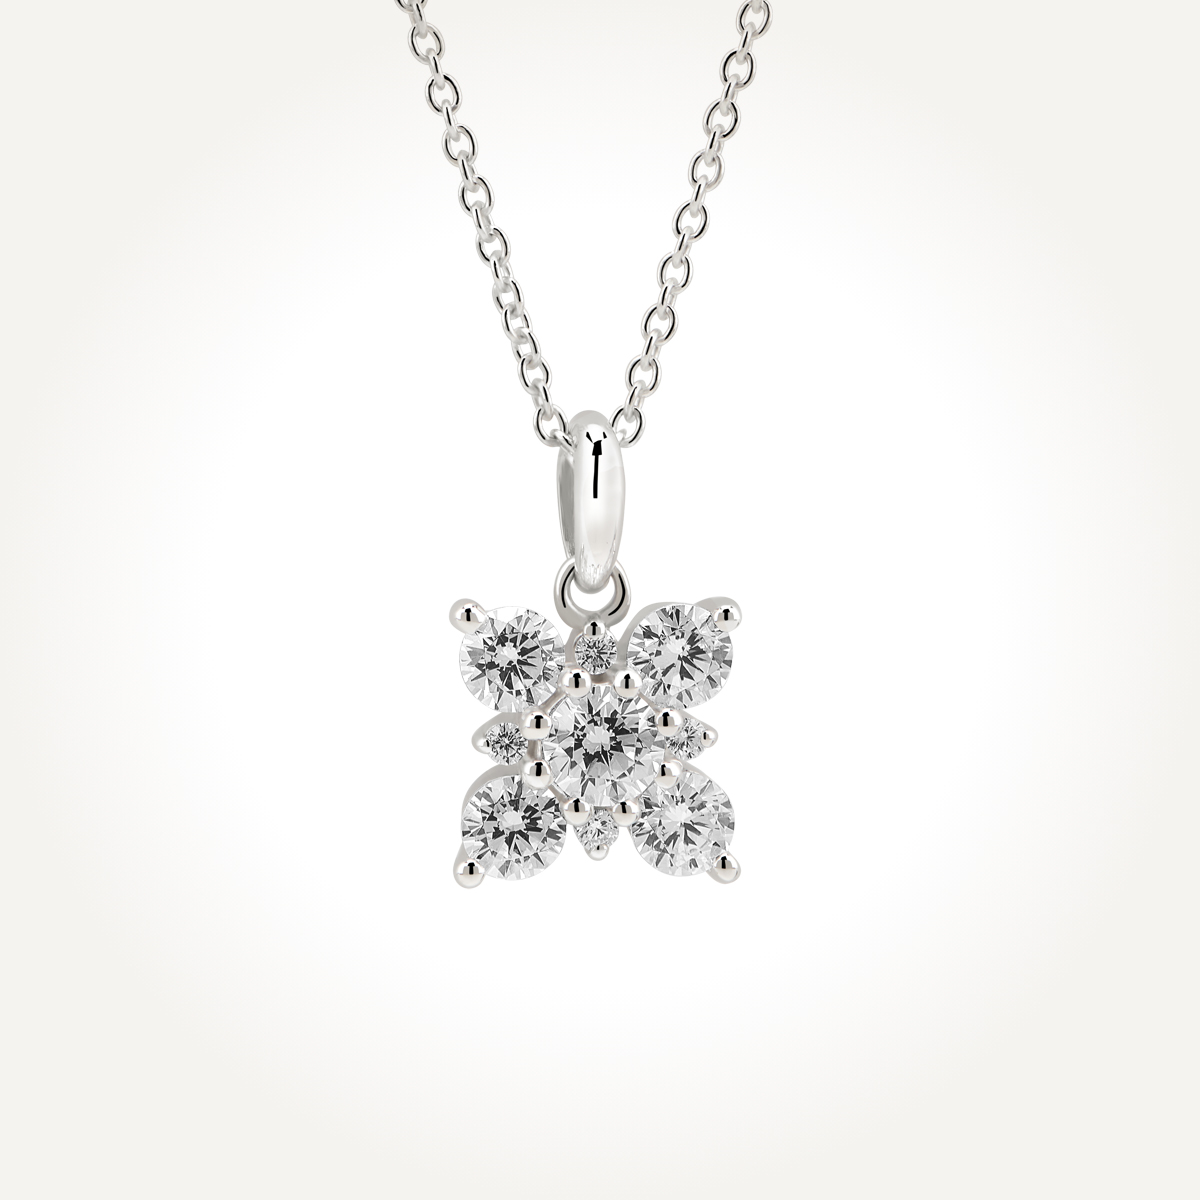 14KT White Gold Diamond Cluster Necklace